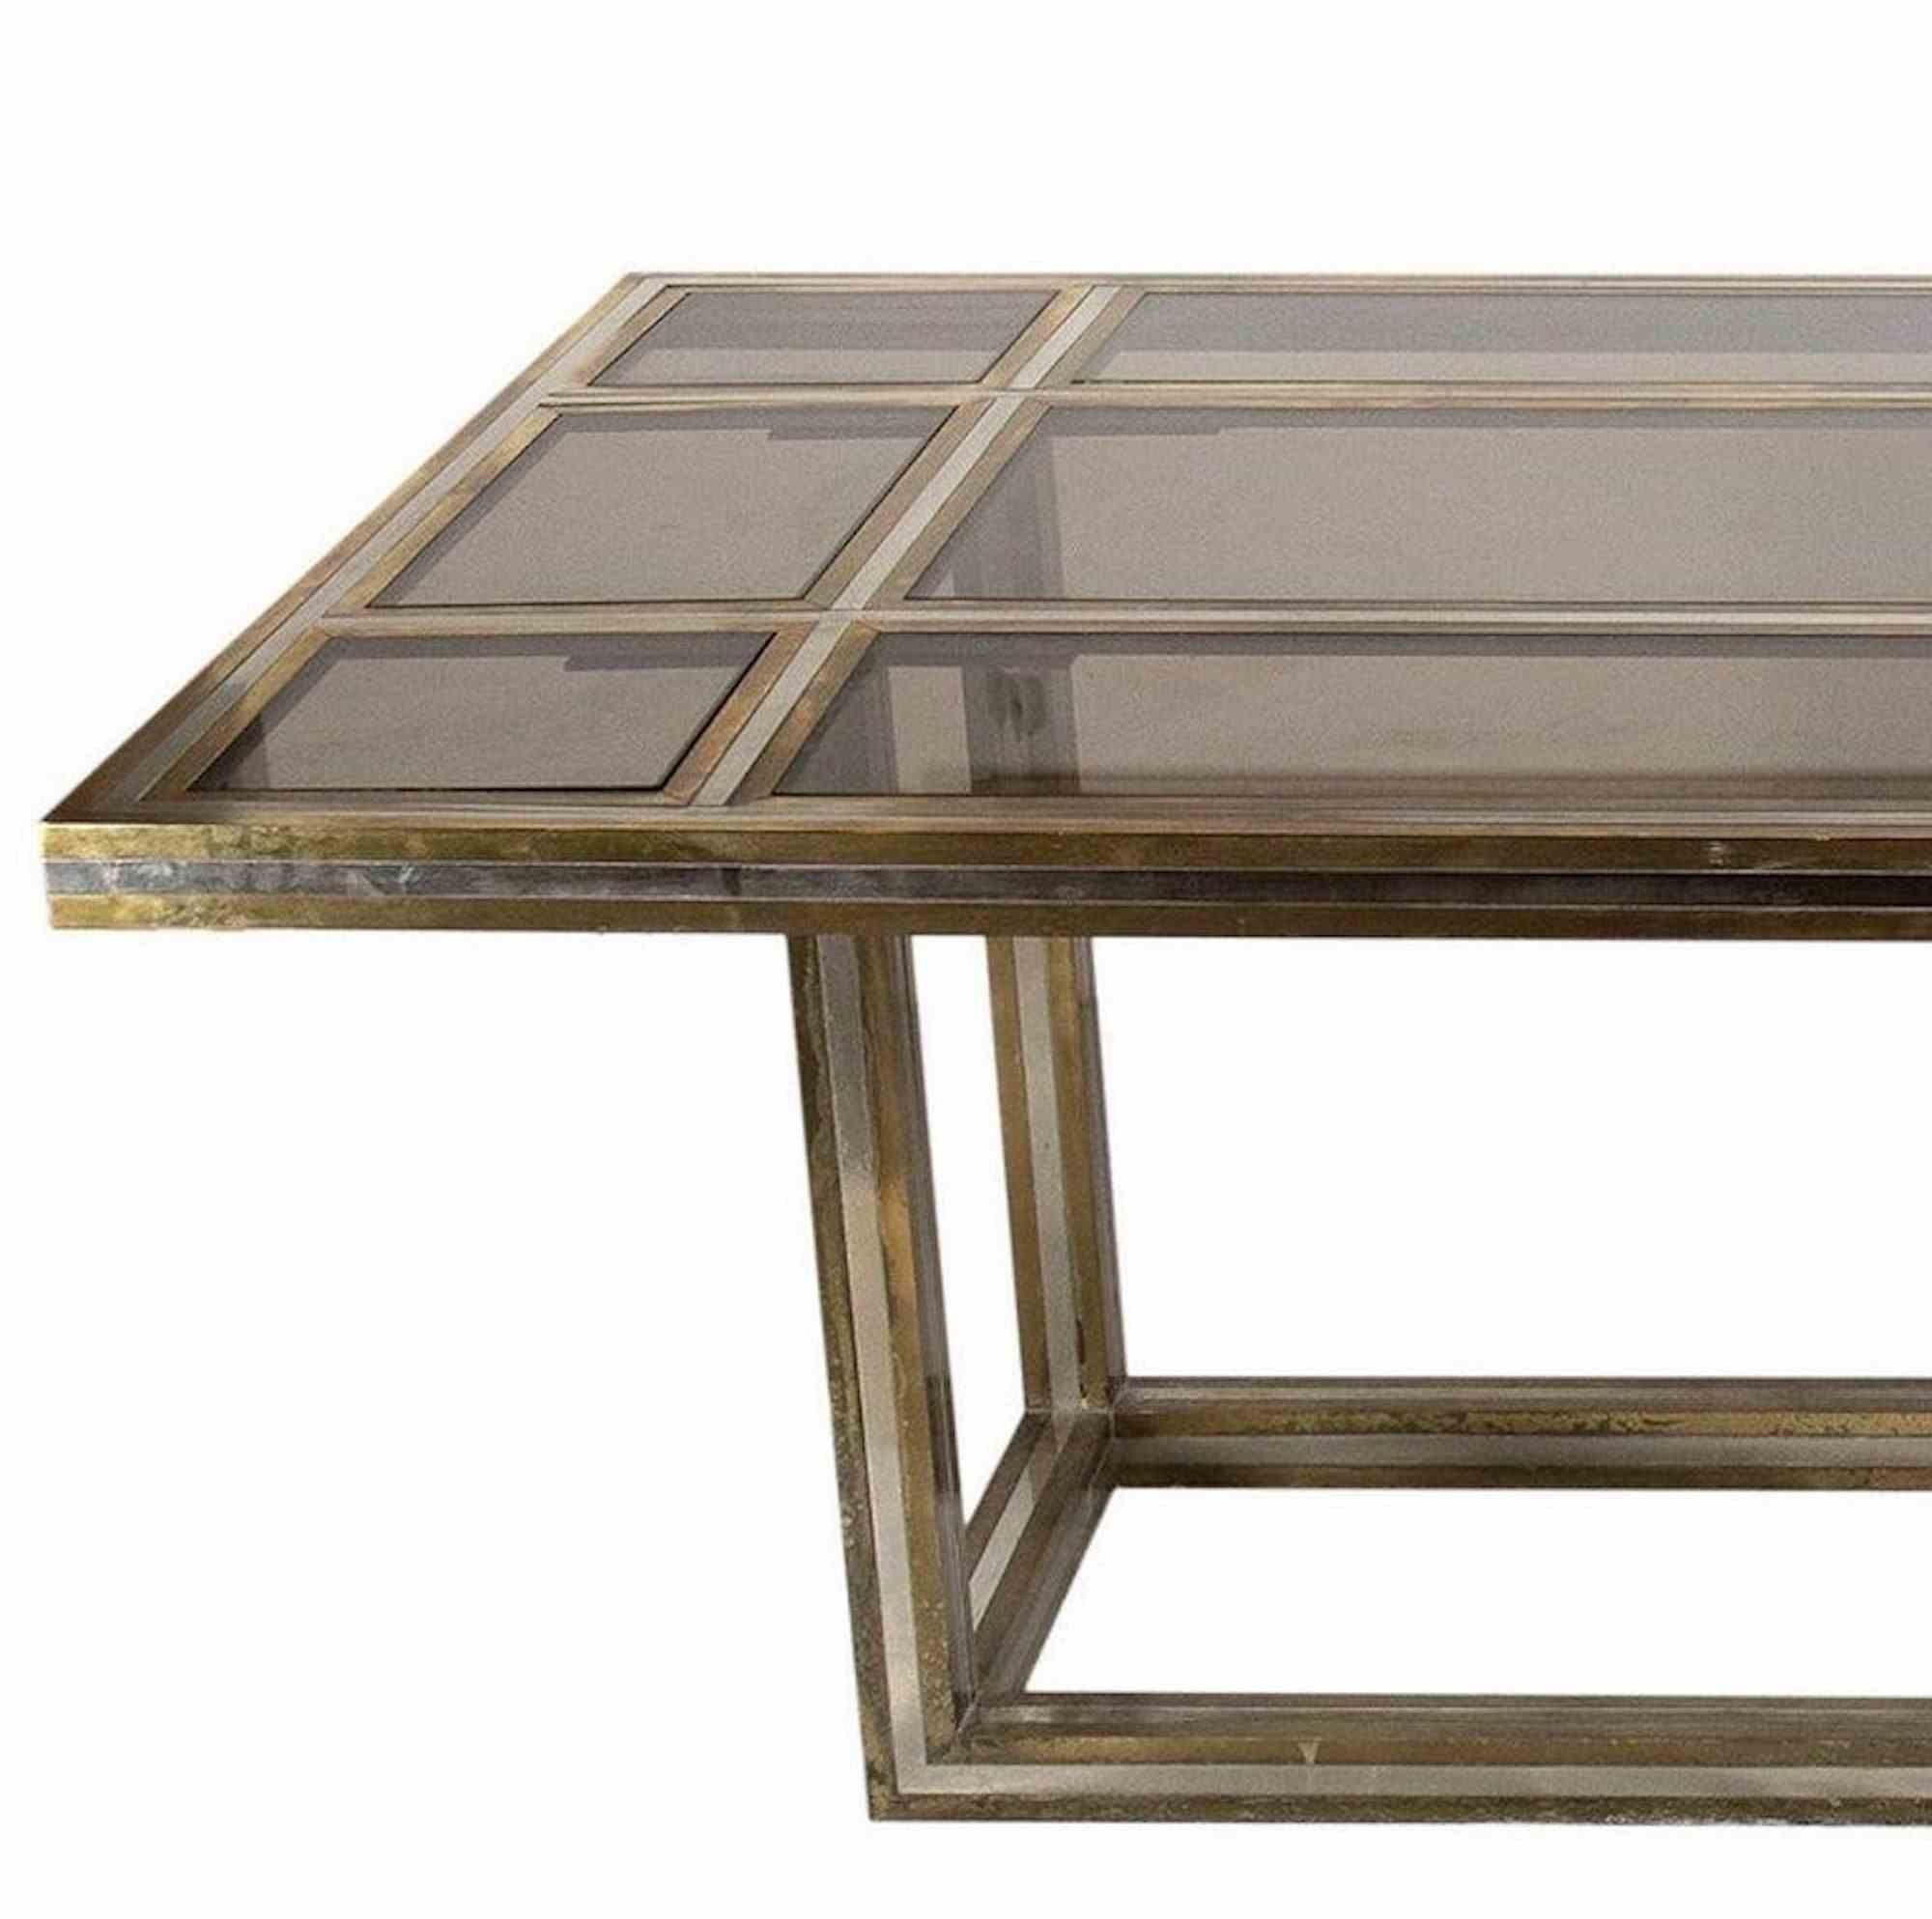 A majestic and elegant large dining table by the Italian designer Romeo Rega.

Rectangular table with brass and steel frame. Top in brass and steel and smoked crystal.

Work accompanied by a certificate of authenticity from the Rega